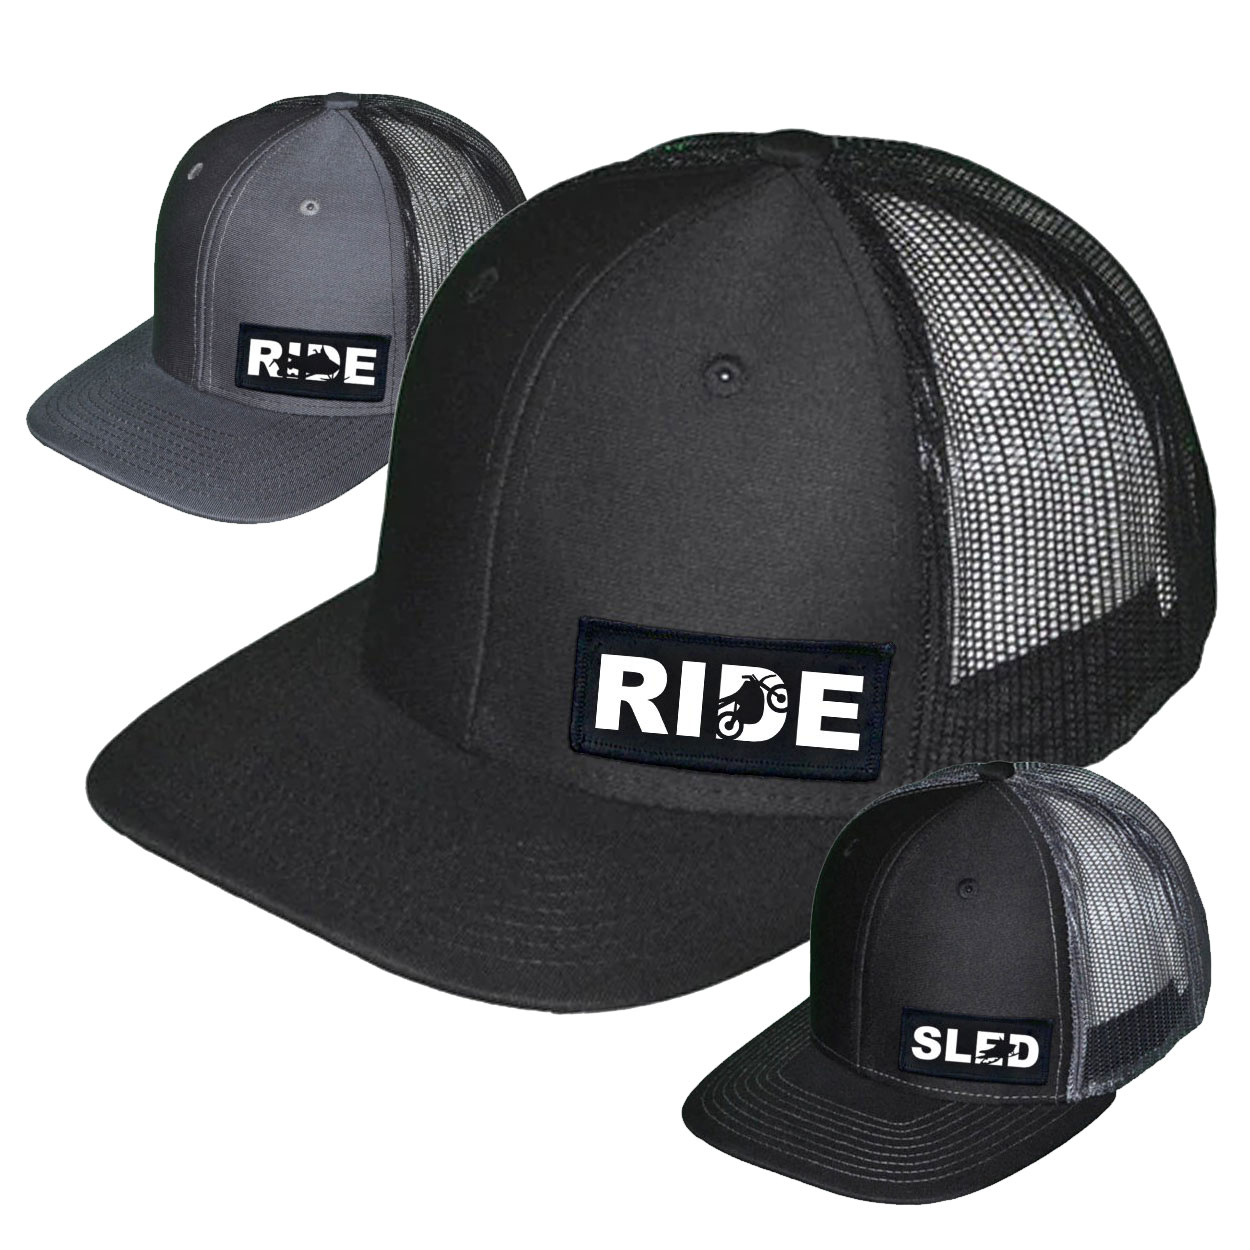 Ride Brand Snapback Trucker Hat Set - FREE Promotional Giveaway from RideBrand.com (Dealers Only, Set of 3, Intended as Staff Thank You Holiday Gifts)